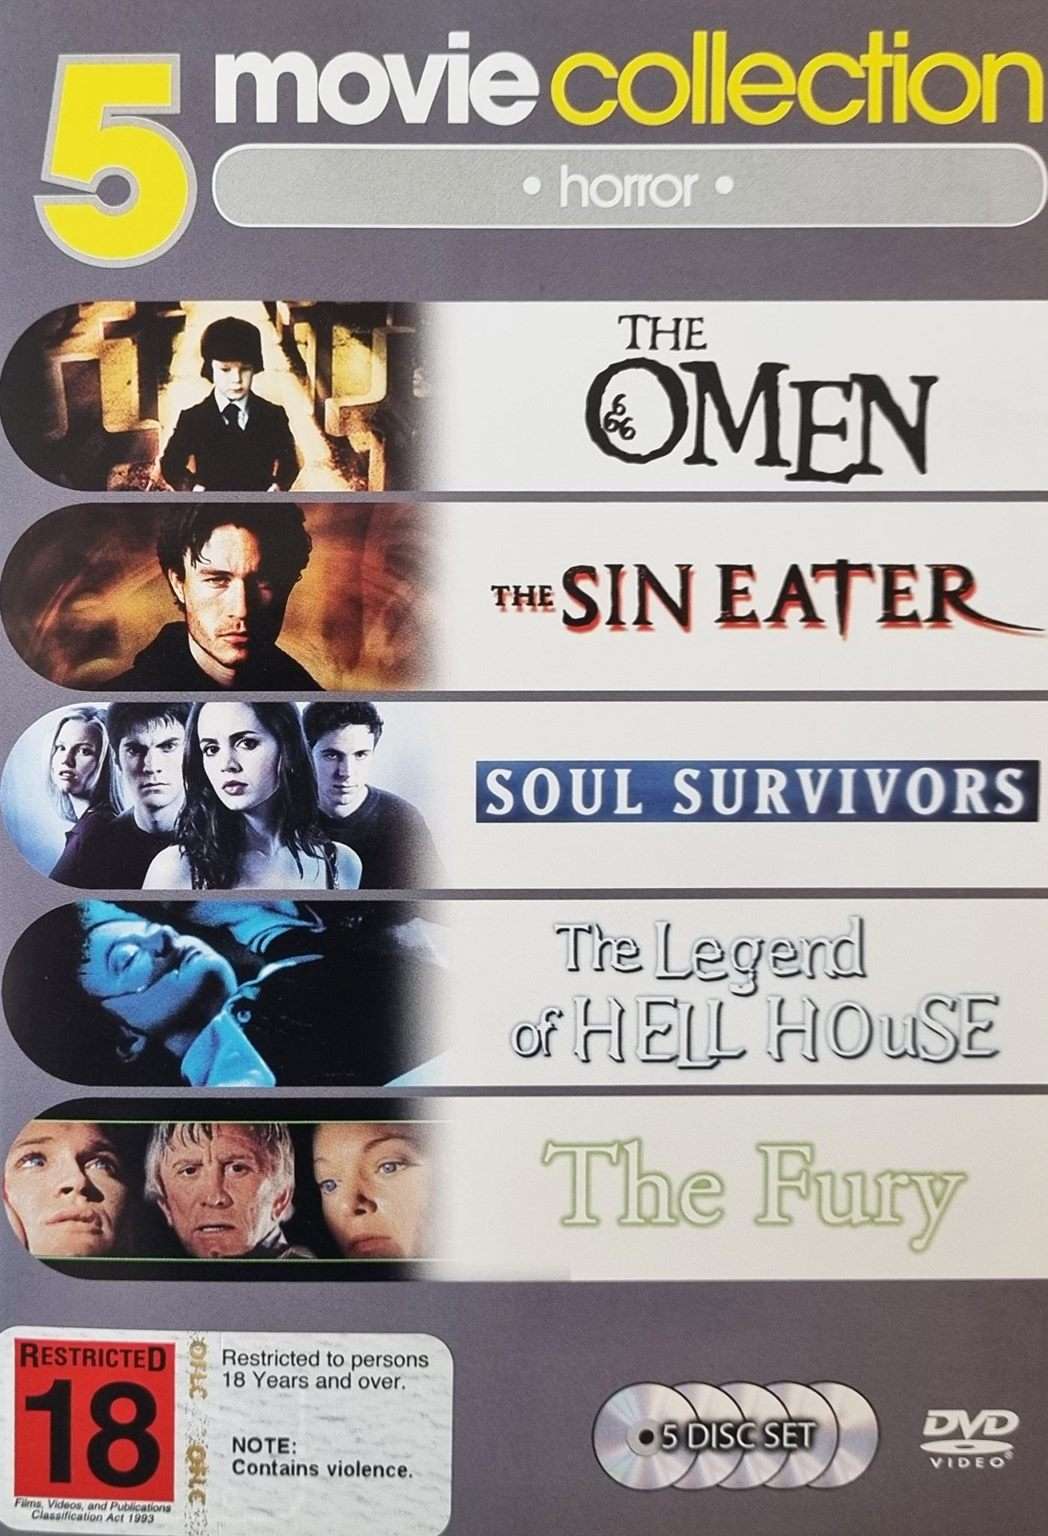 The Omen / The Sin Eater / Soul Survivors / The Legend of Hell House / The Fury